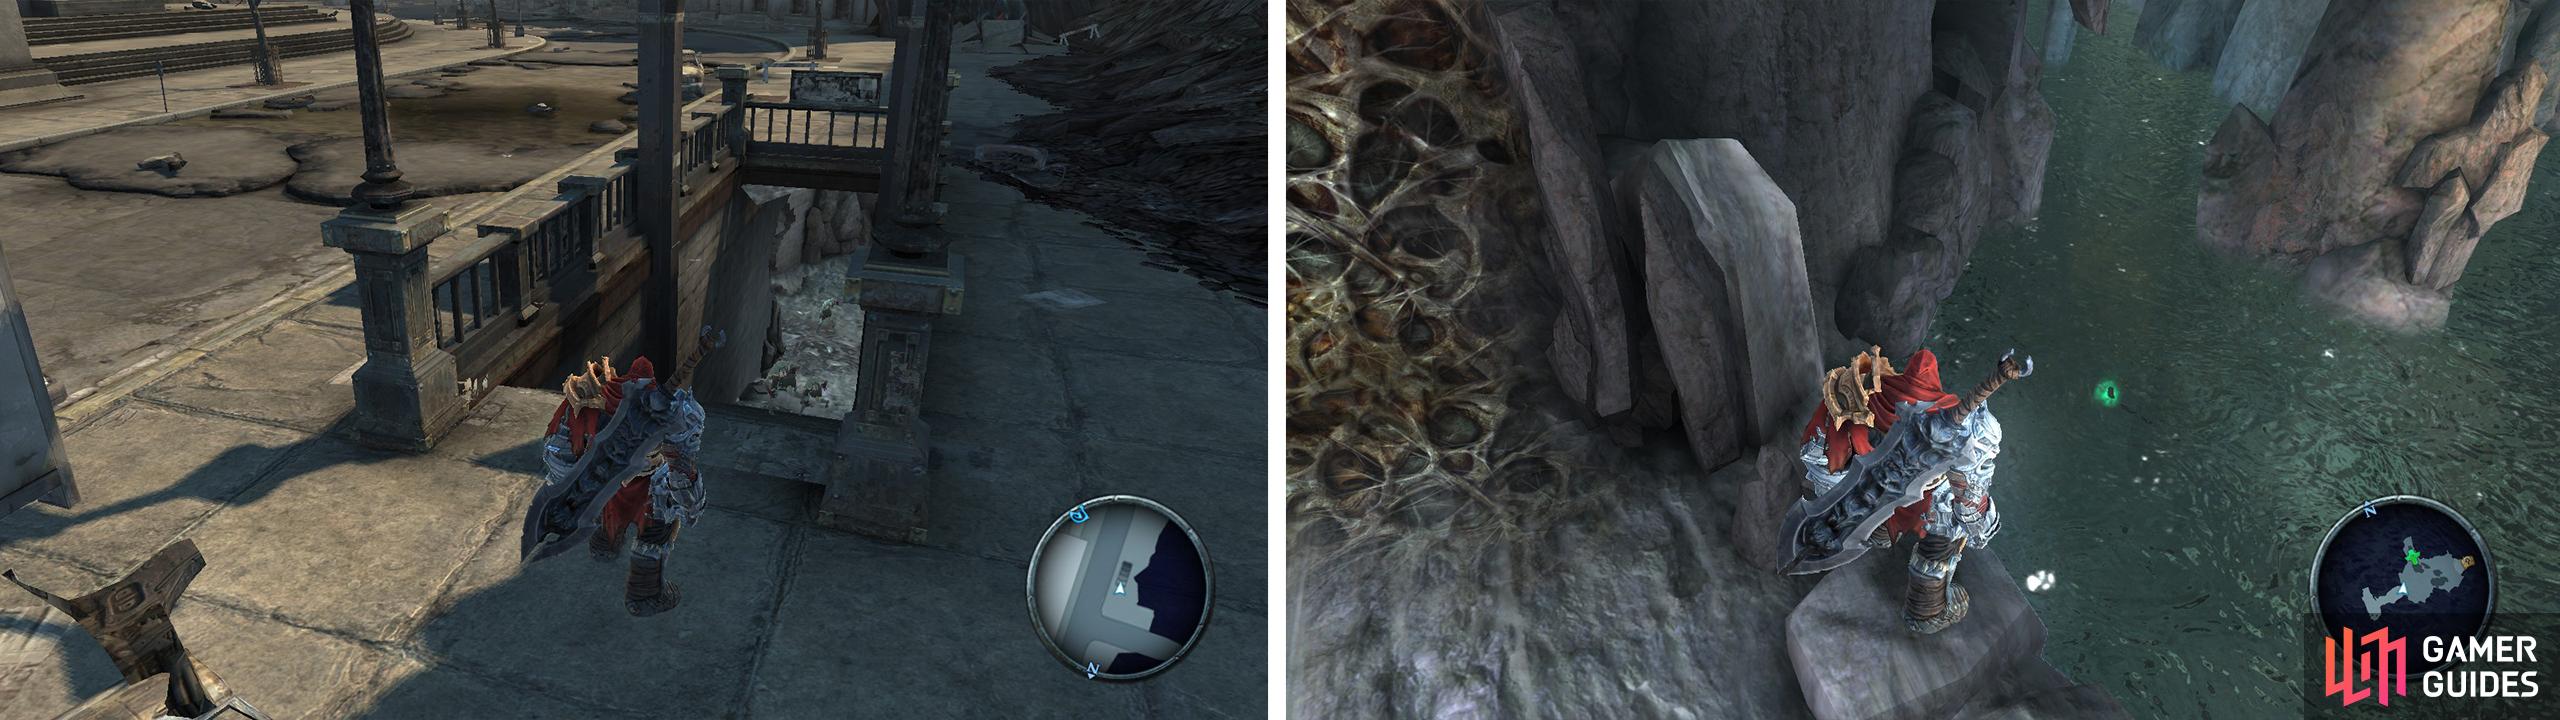 Find the subway stairs (left). Inside youll find a Blue Soul Chest and an Artefact (right).